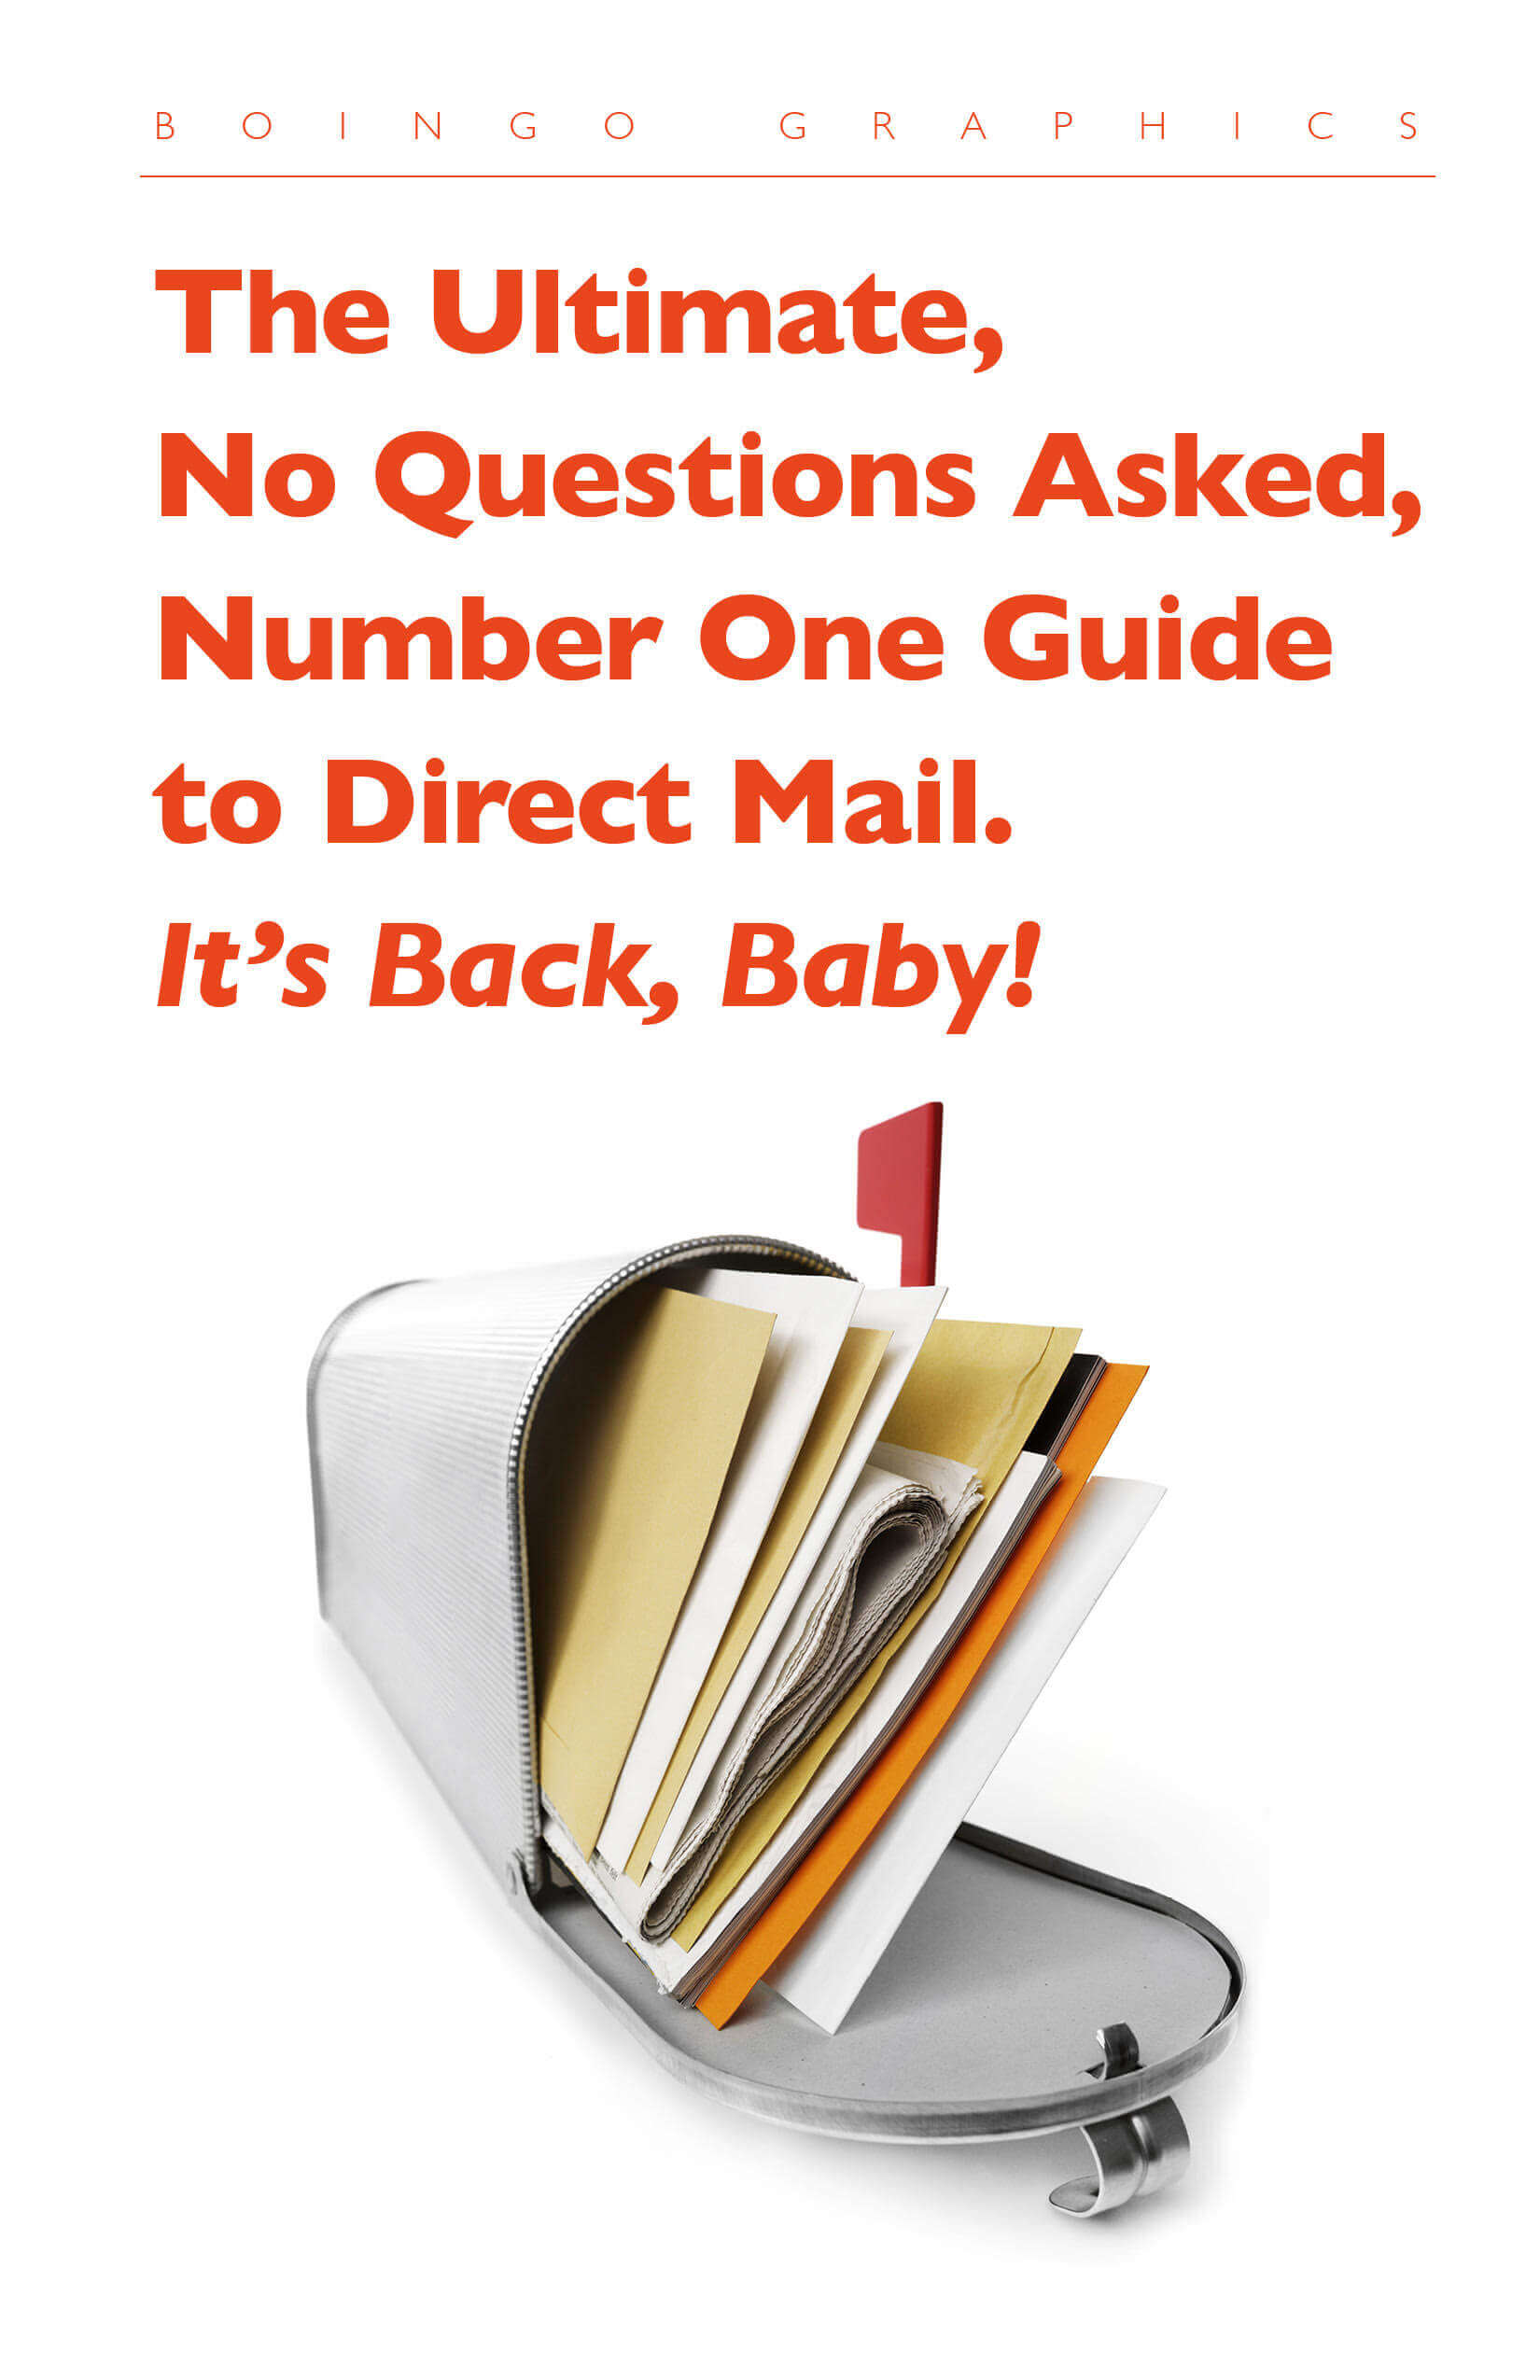 The Ultimate Guide to Direct Mail